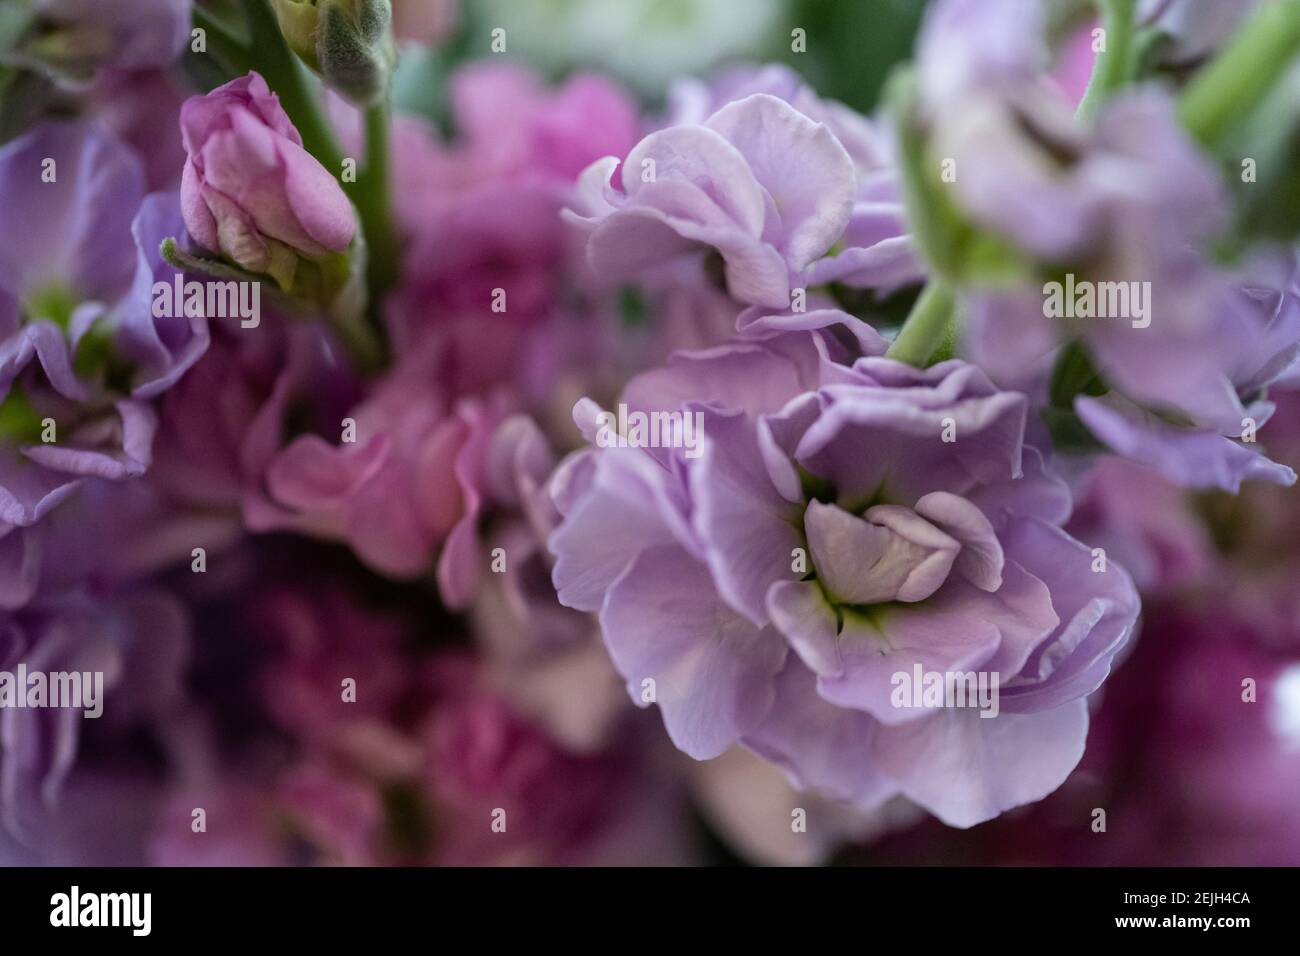 Close-up of Stock flowers (Matthiola Incana) also known as  Gillyflower or Perfume Plant Stock Photo